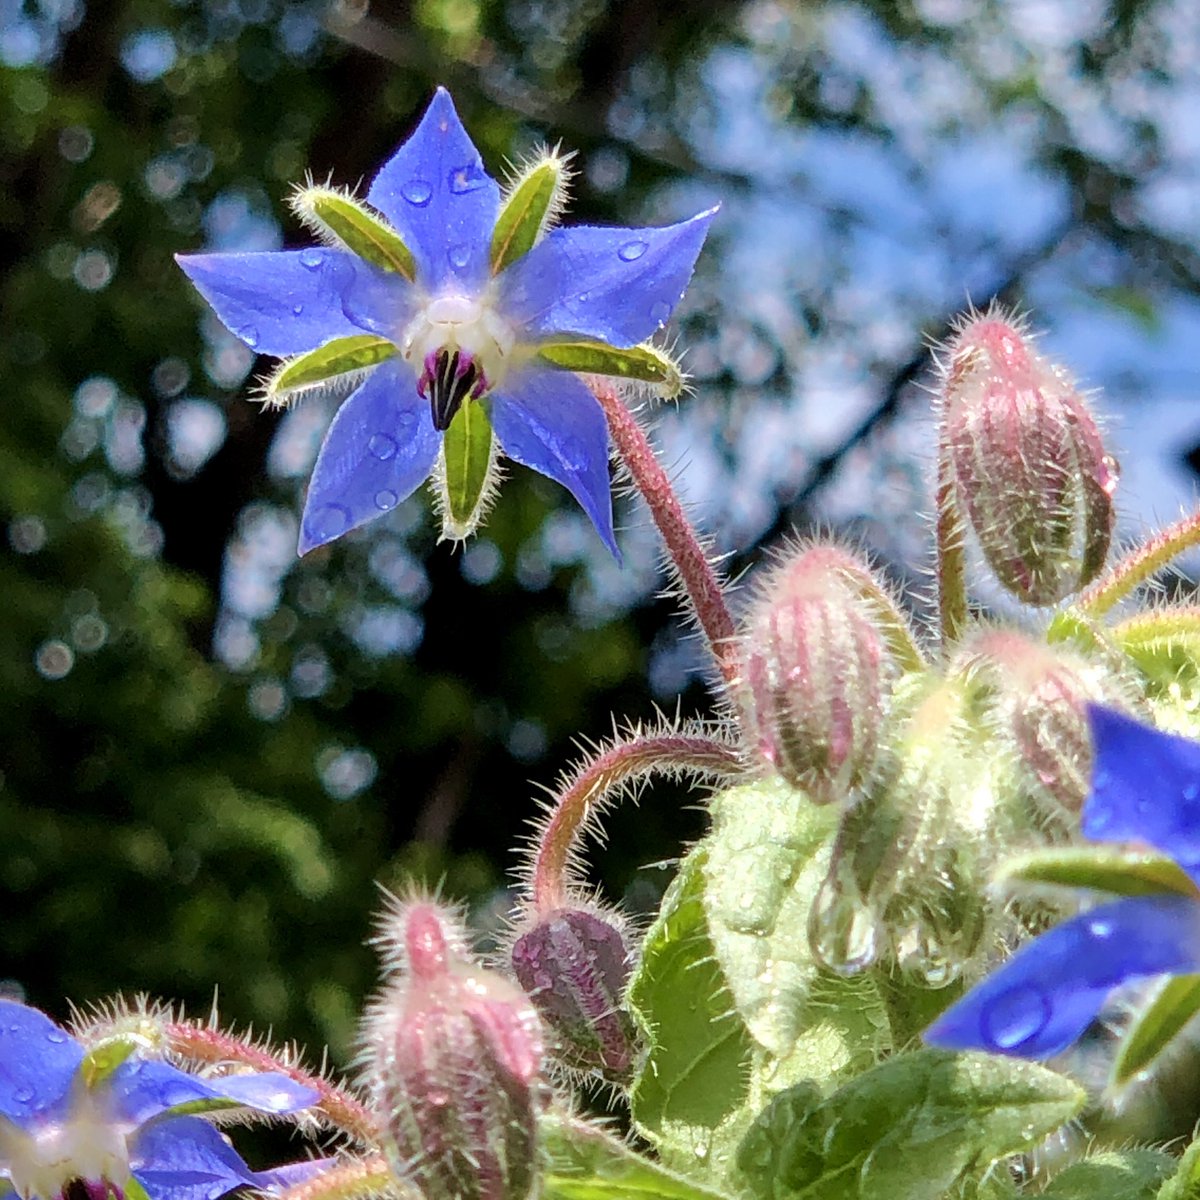 Borage after the rain.
#blue #borage #iphonex #herbalifenutrition #raw_flowers #superb_flowers #awesome_florals #infinity_flowers #explore_floral_ #explore_macro #raw_macro #infinity_macro_details #total_flowers #total_macro #pocket_flowers #pocket_macro #loves_flowers_ #star